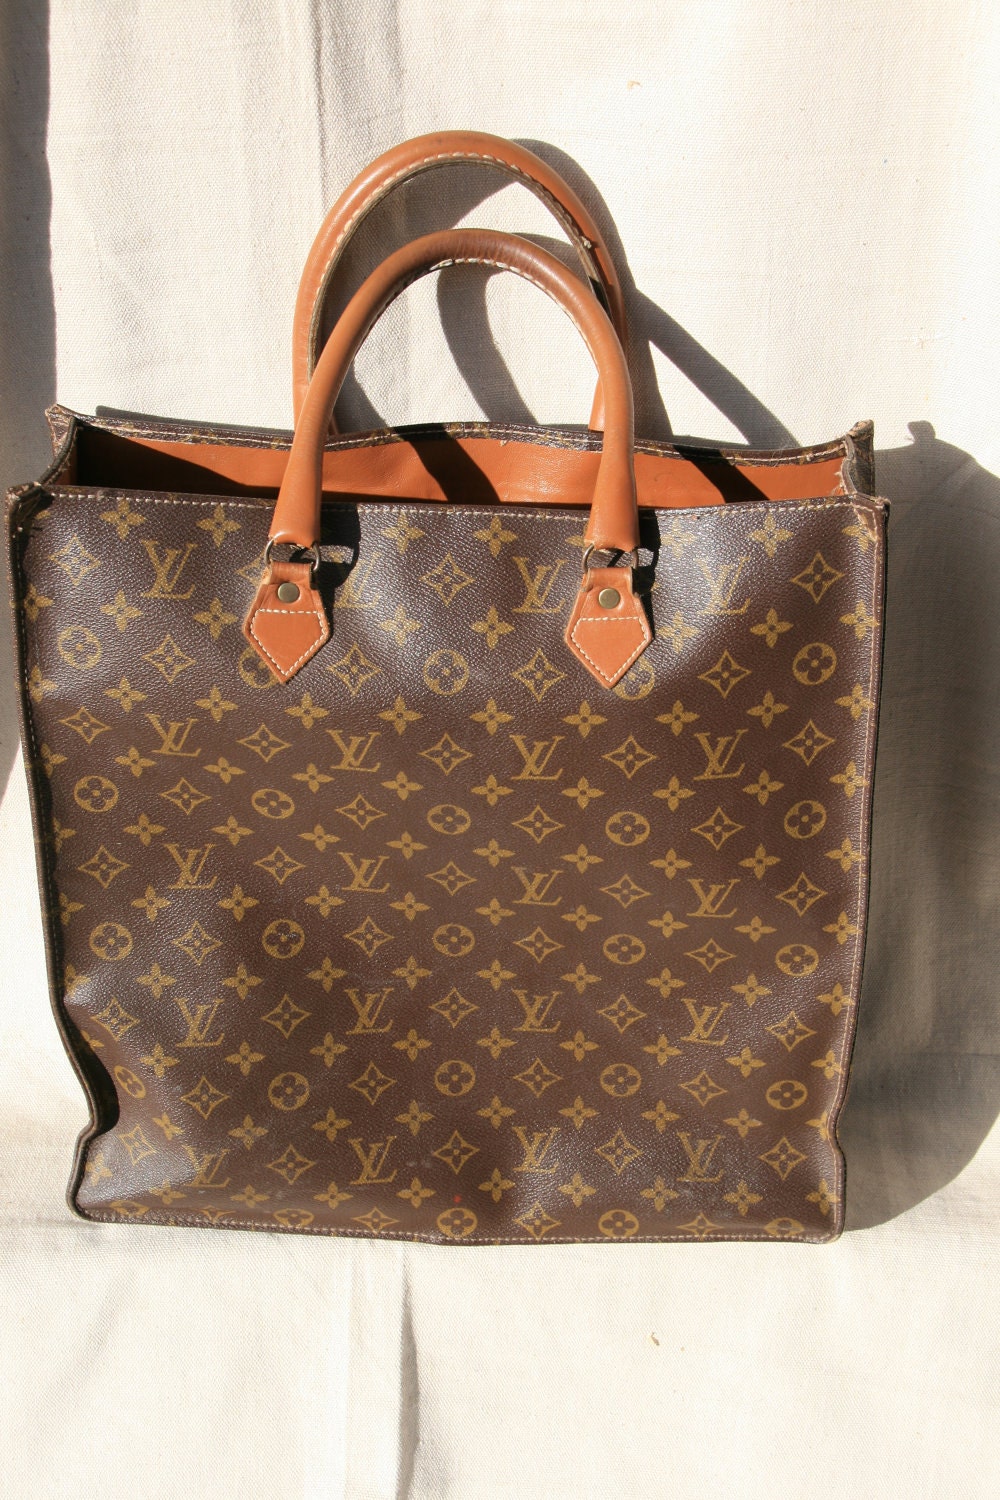 Items similar to Vintage LOUIS VUITTON Sac Tote Bag Authentic made in the USA by French Company ...